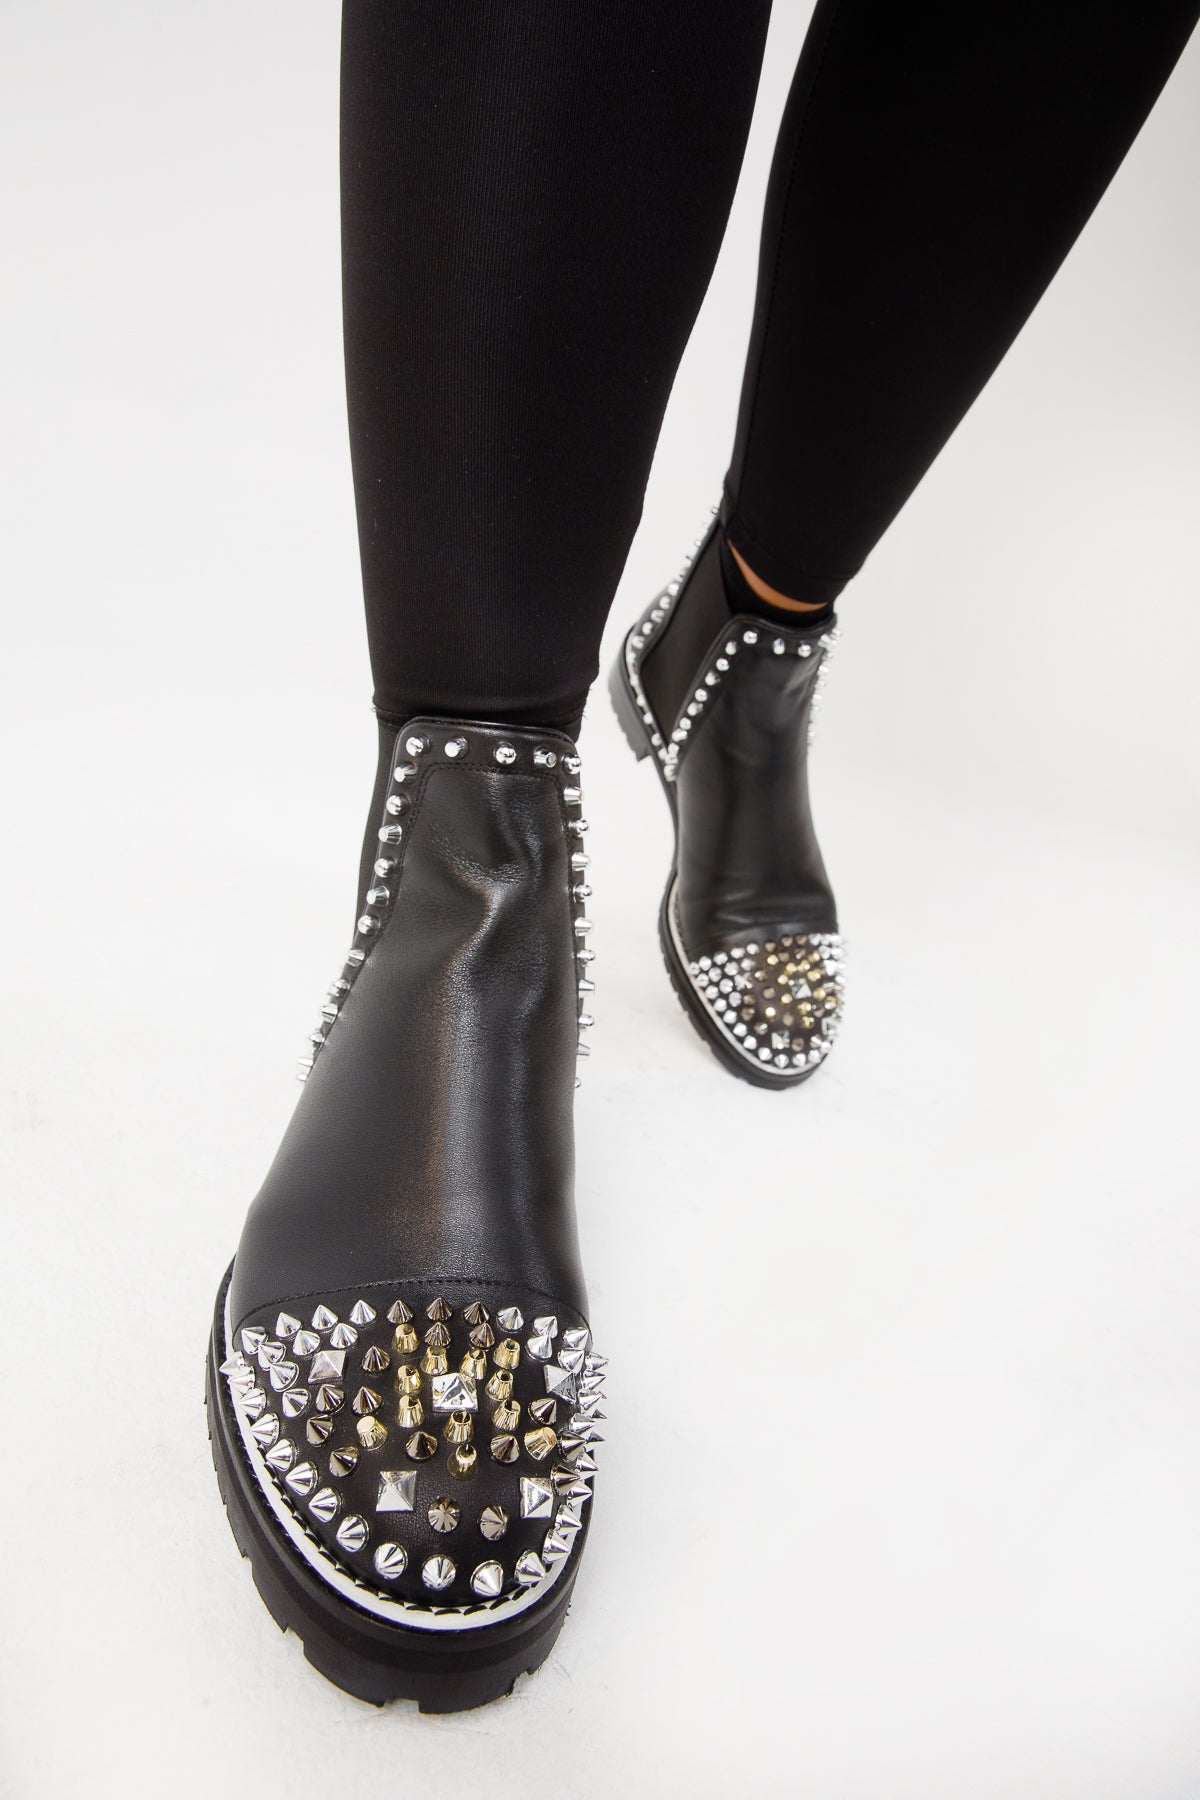 The Vuvulane Black Spike Leather Ankle Women Boot